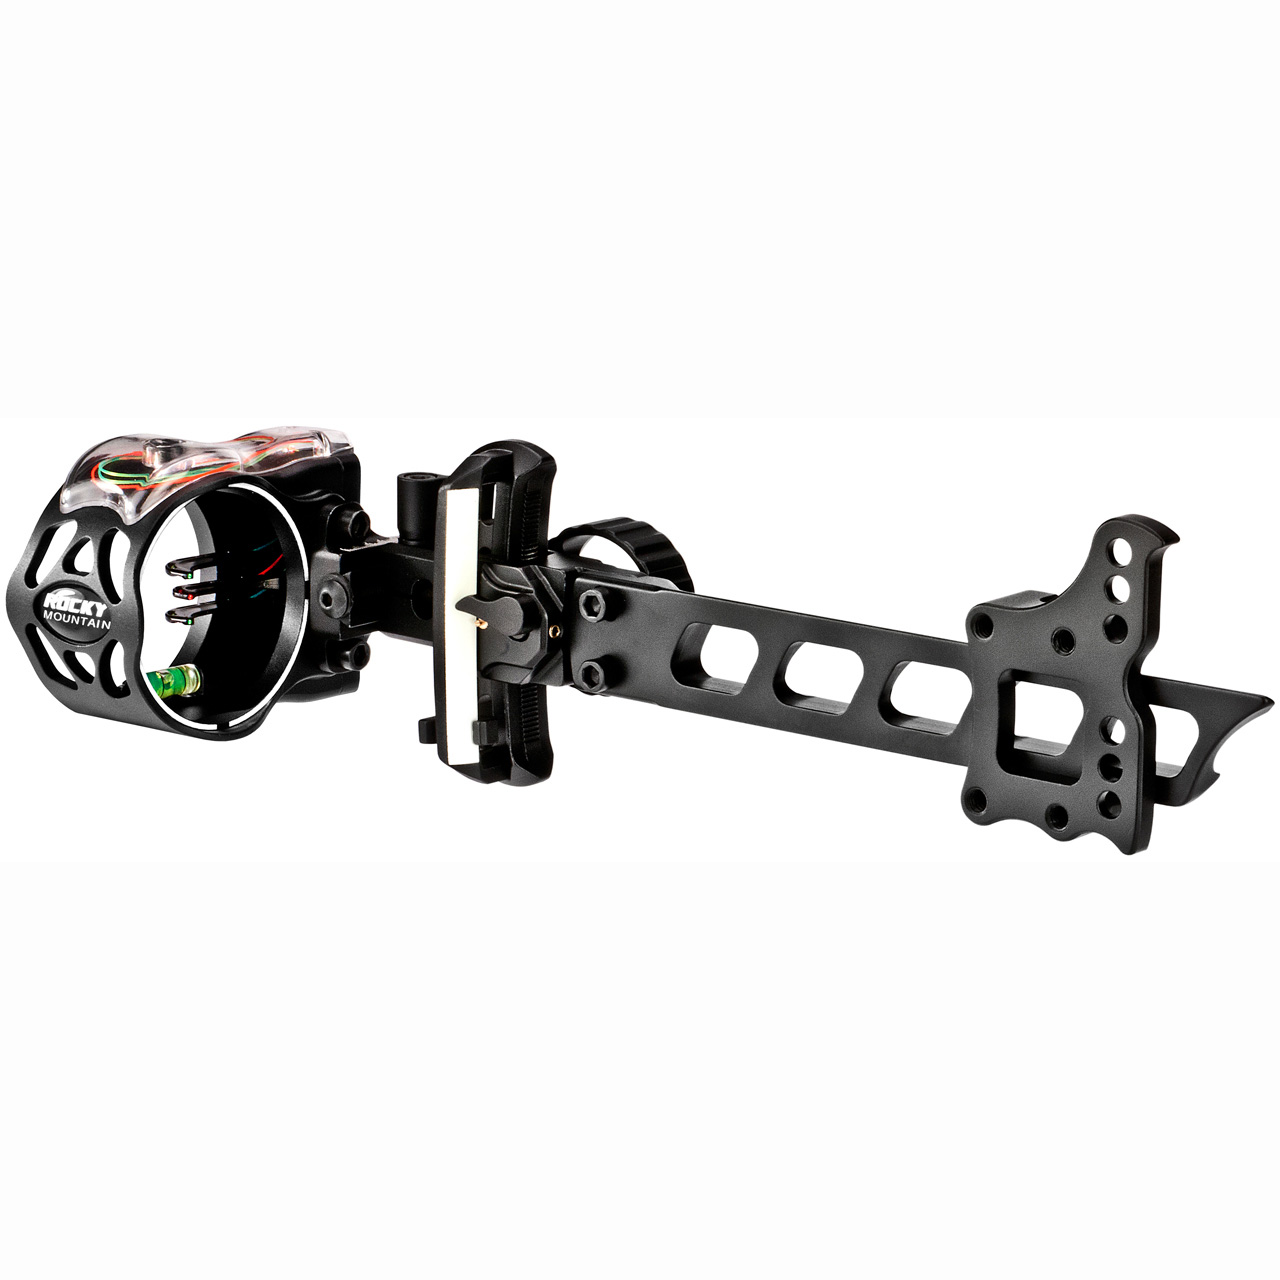 RM56201 Rocky Mountain Driver 3 Pin Bow Sight with Dovetail Mount